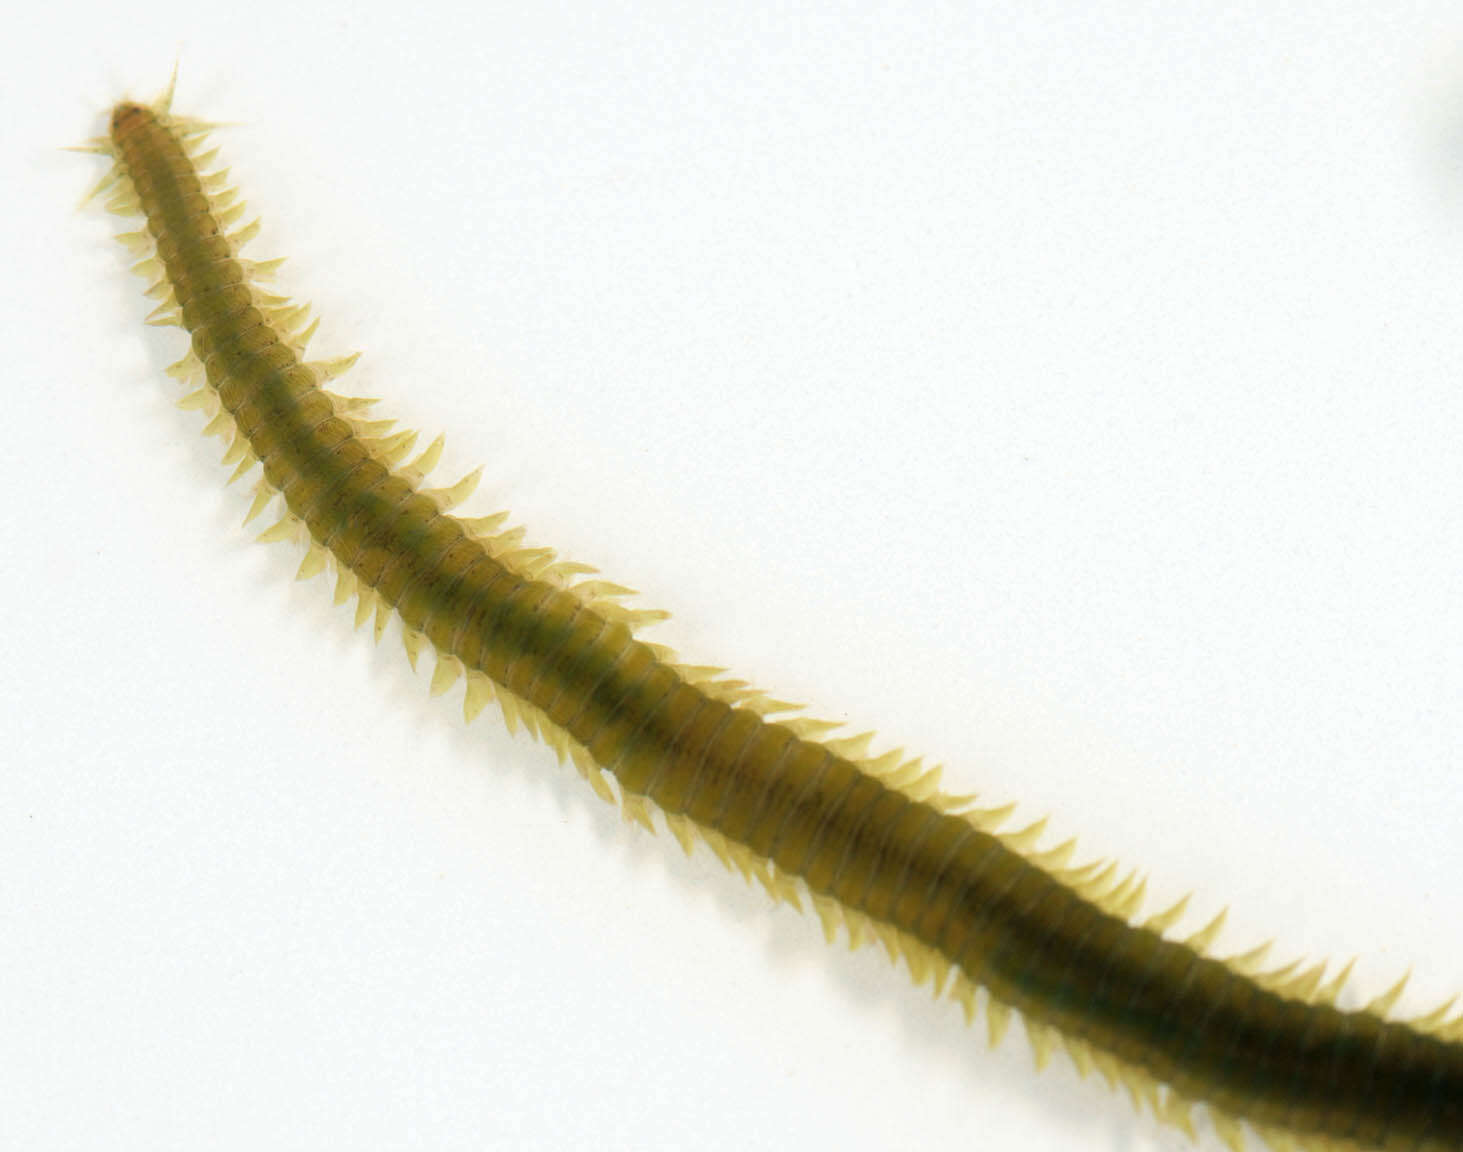 Image of paddleworms